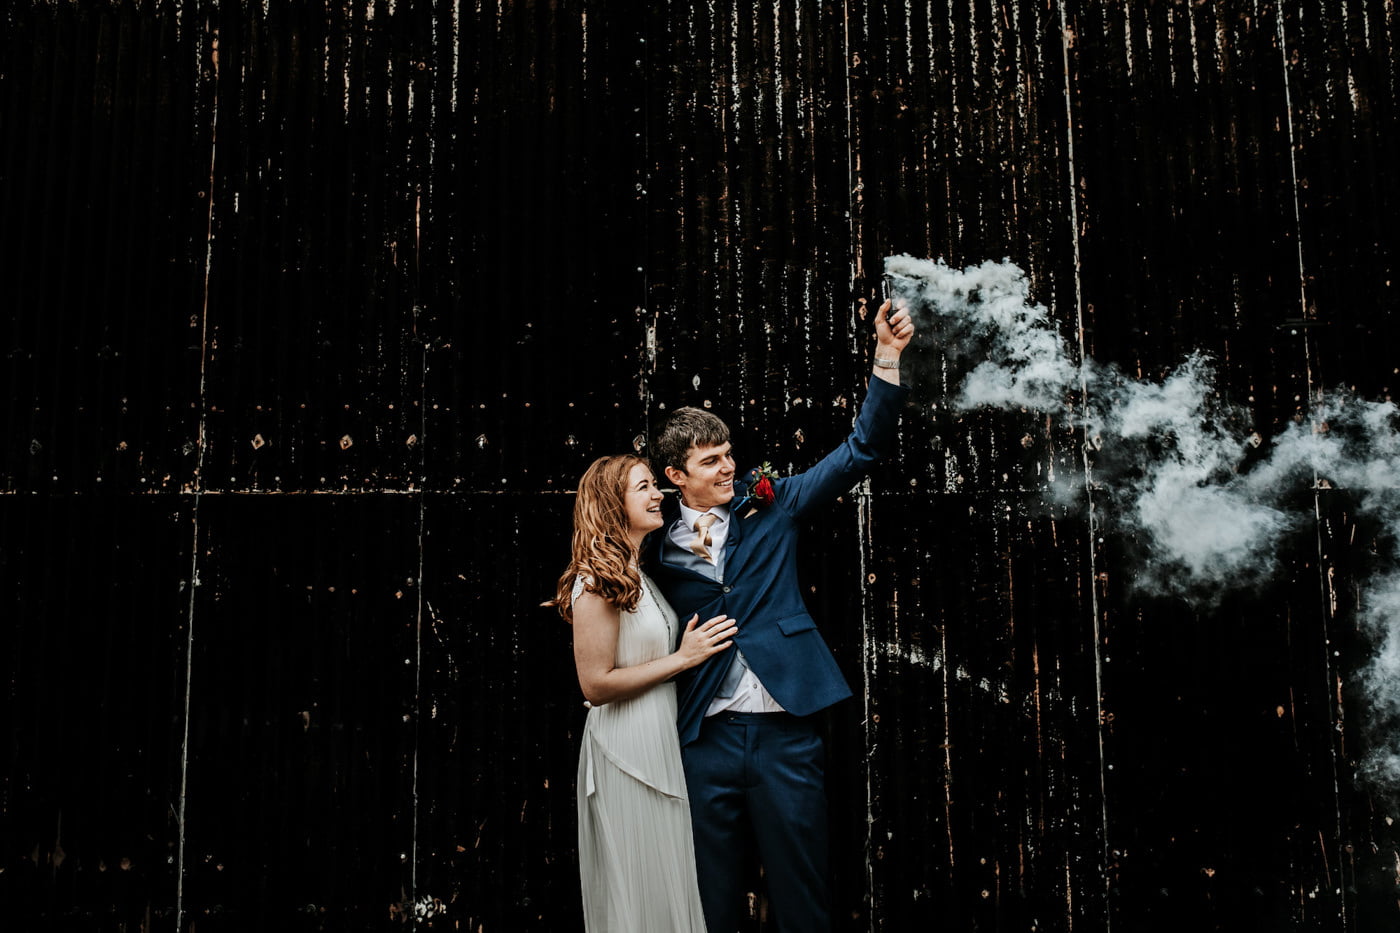 Amelia and Dave, Cripps Barn, Cotswolds 30